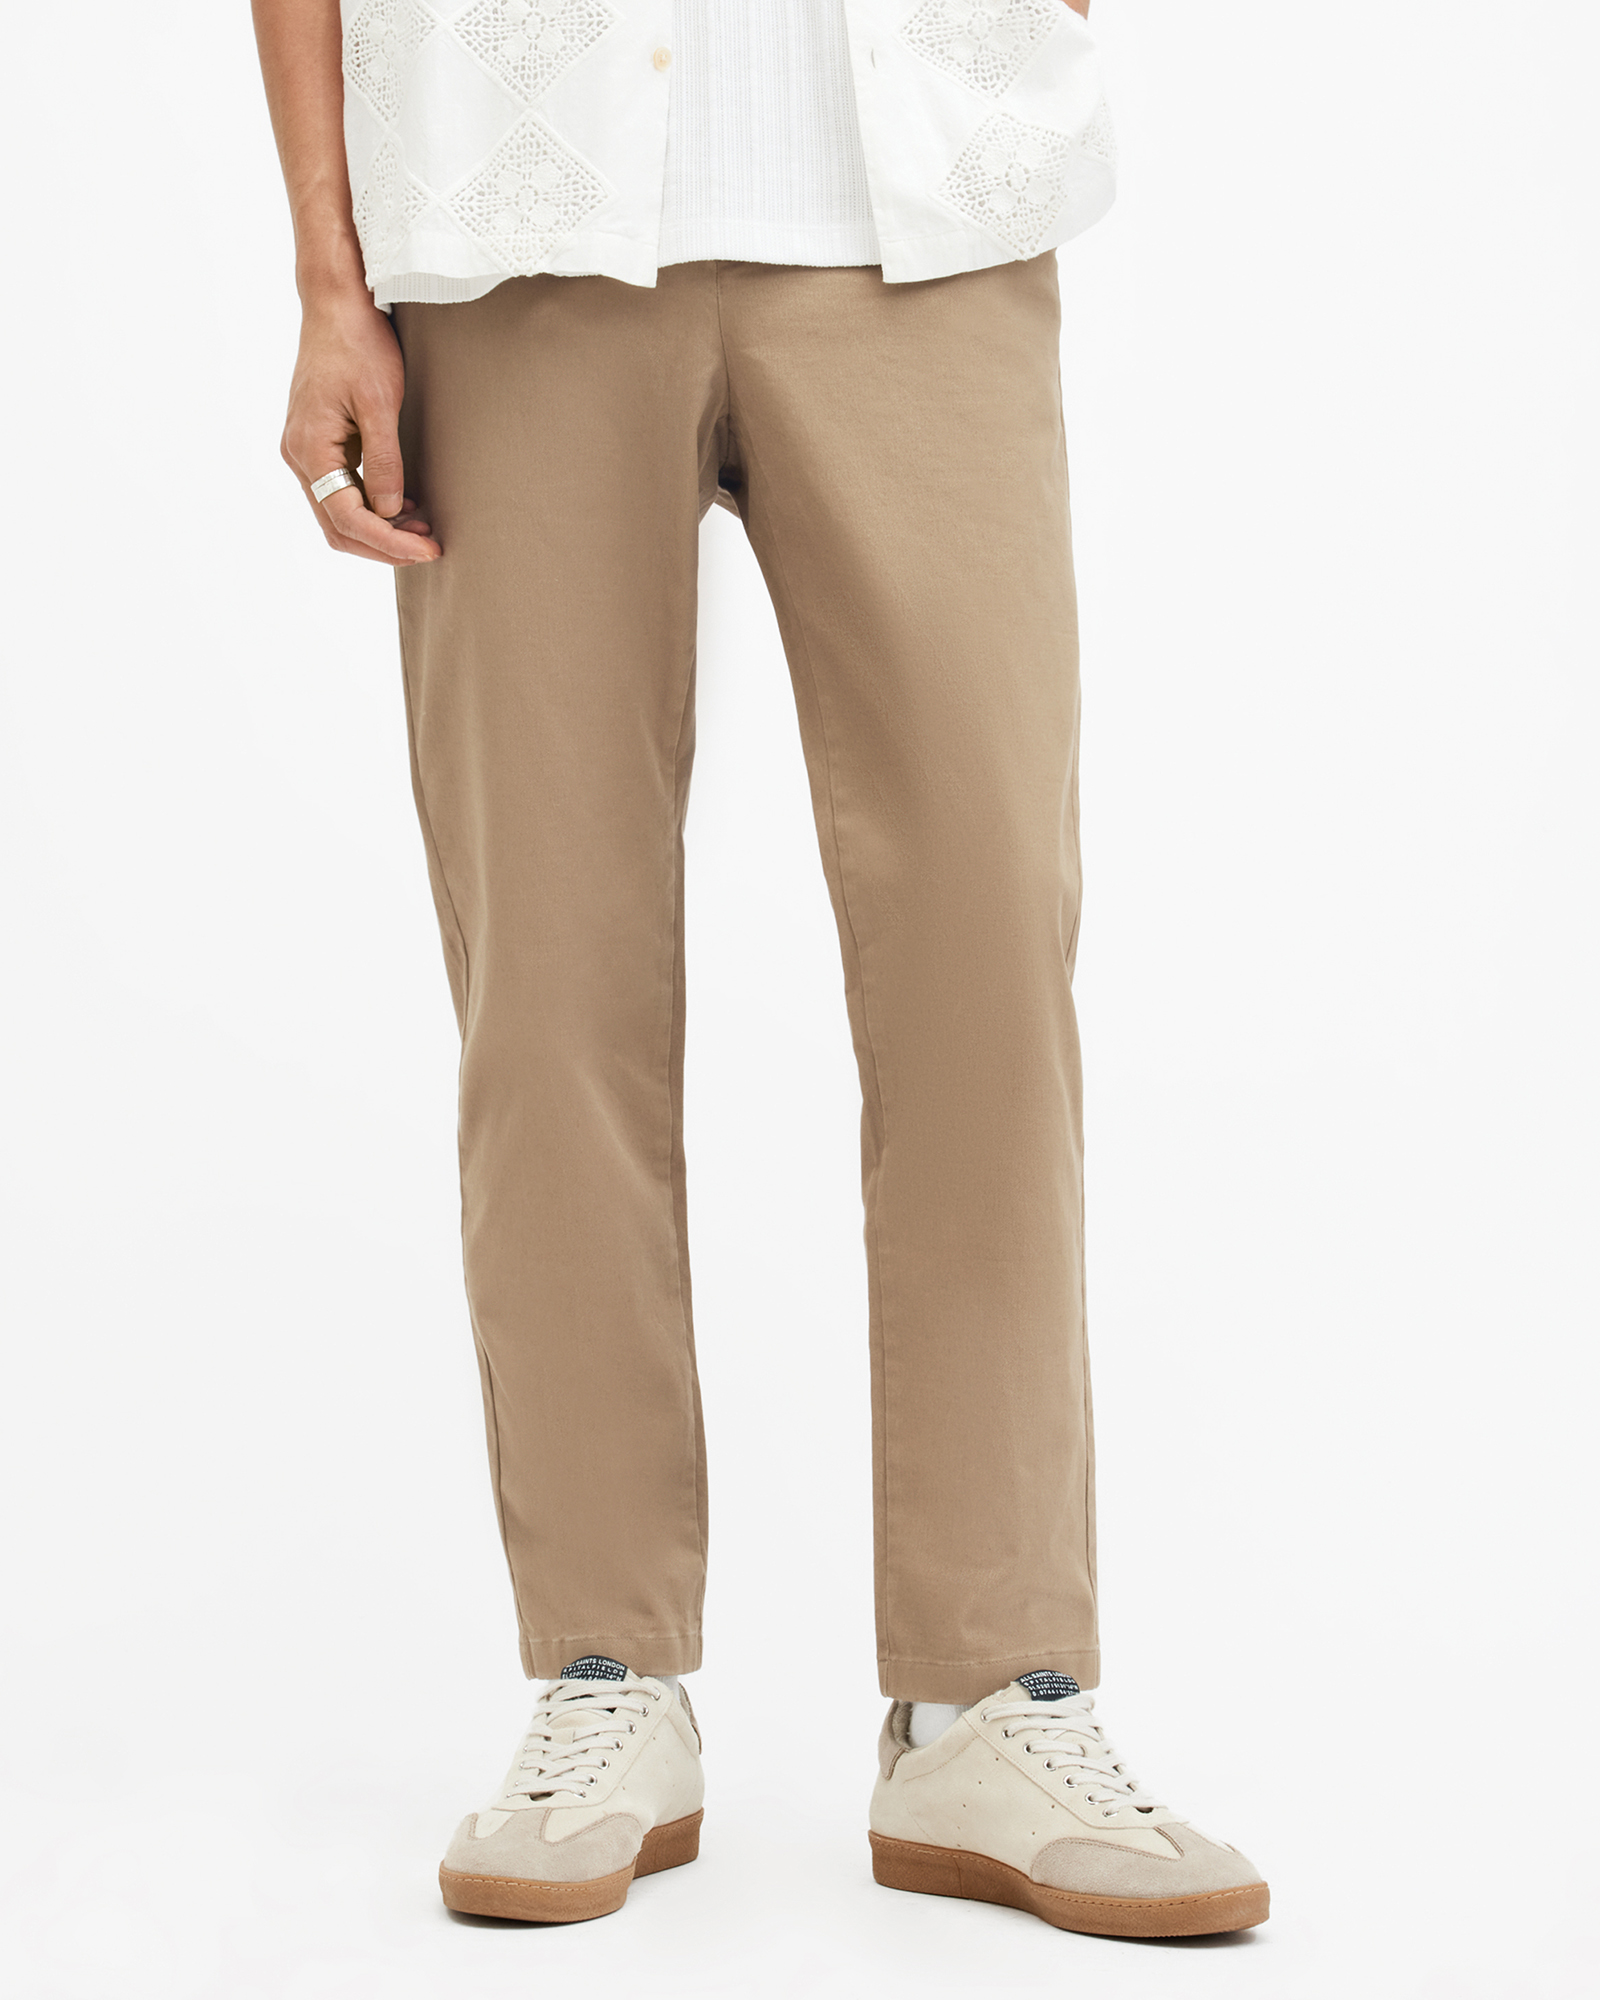 AllSaints Walde Skinny Fit Chino Trousers